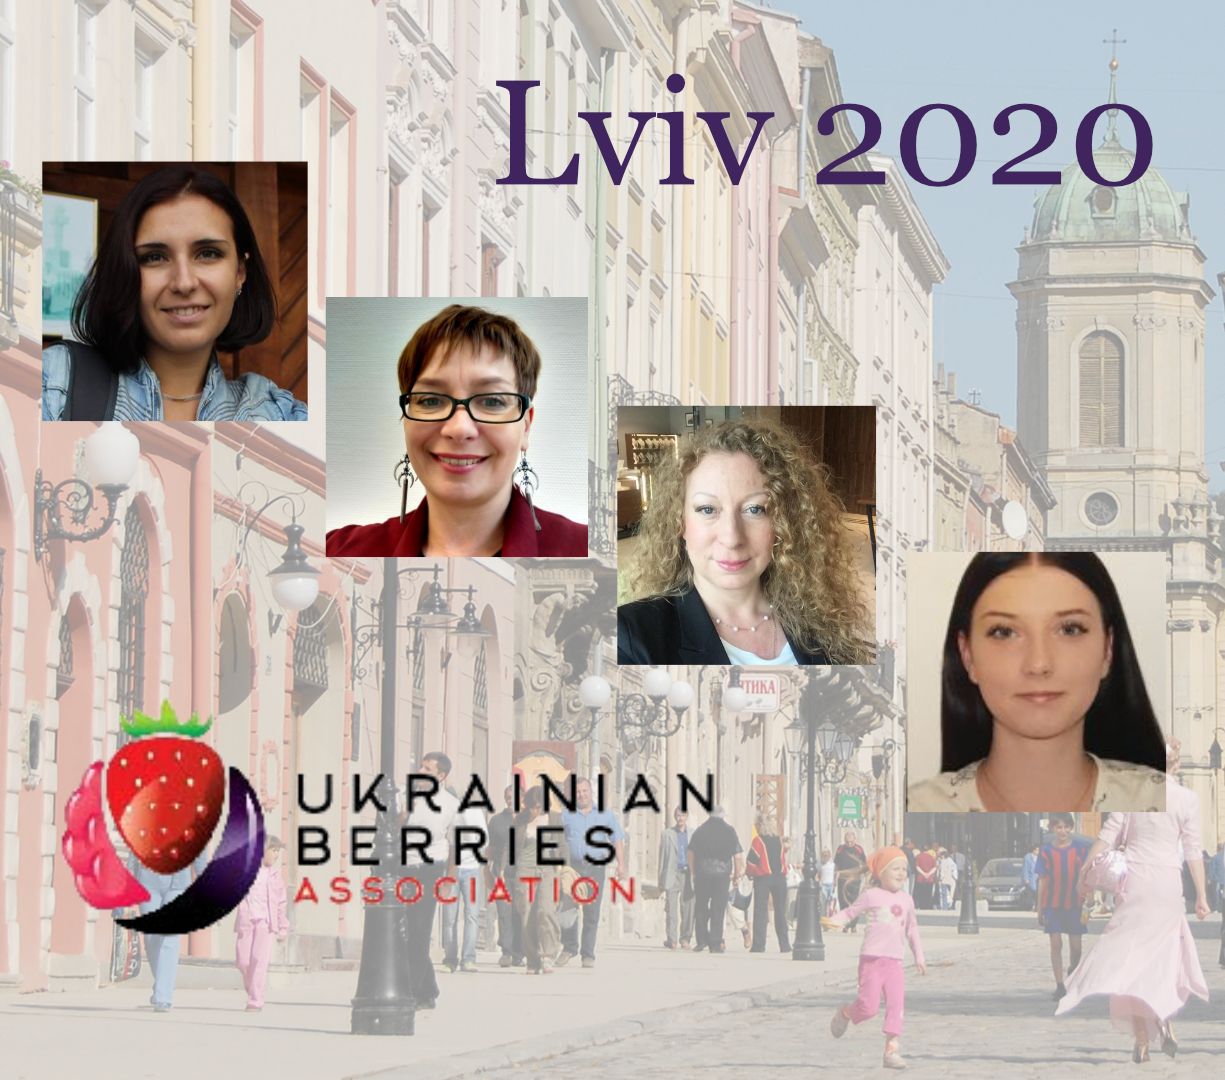 picture of Lviv in the background, portraits of the organizers of the IBA conference 2020 Ukraine, title = Lviv 2020